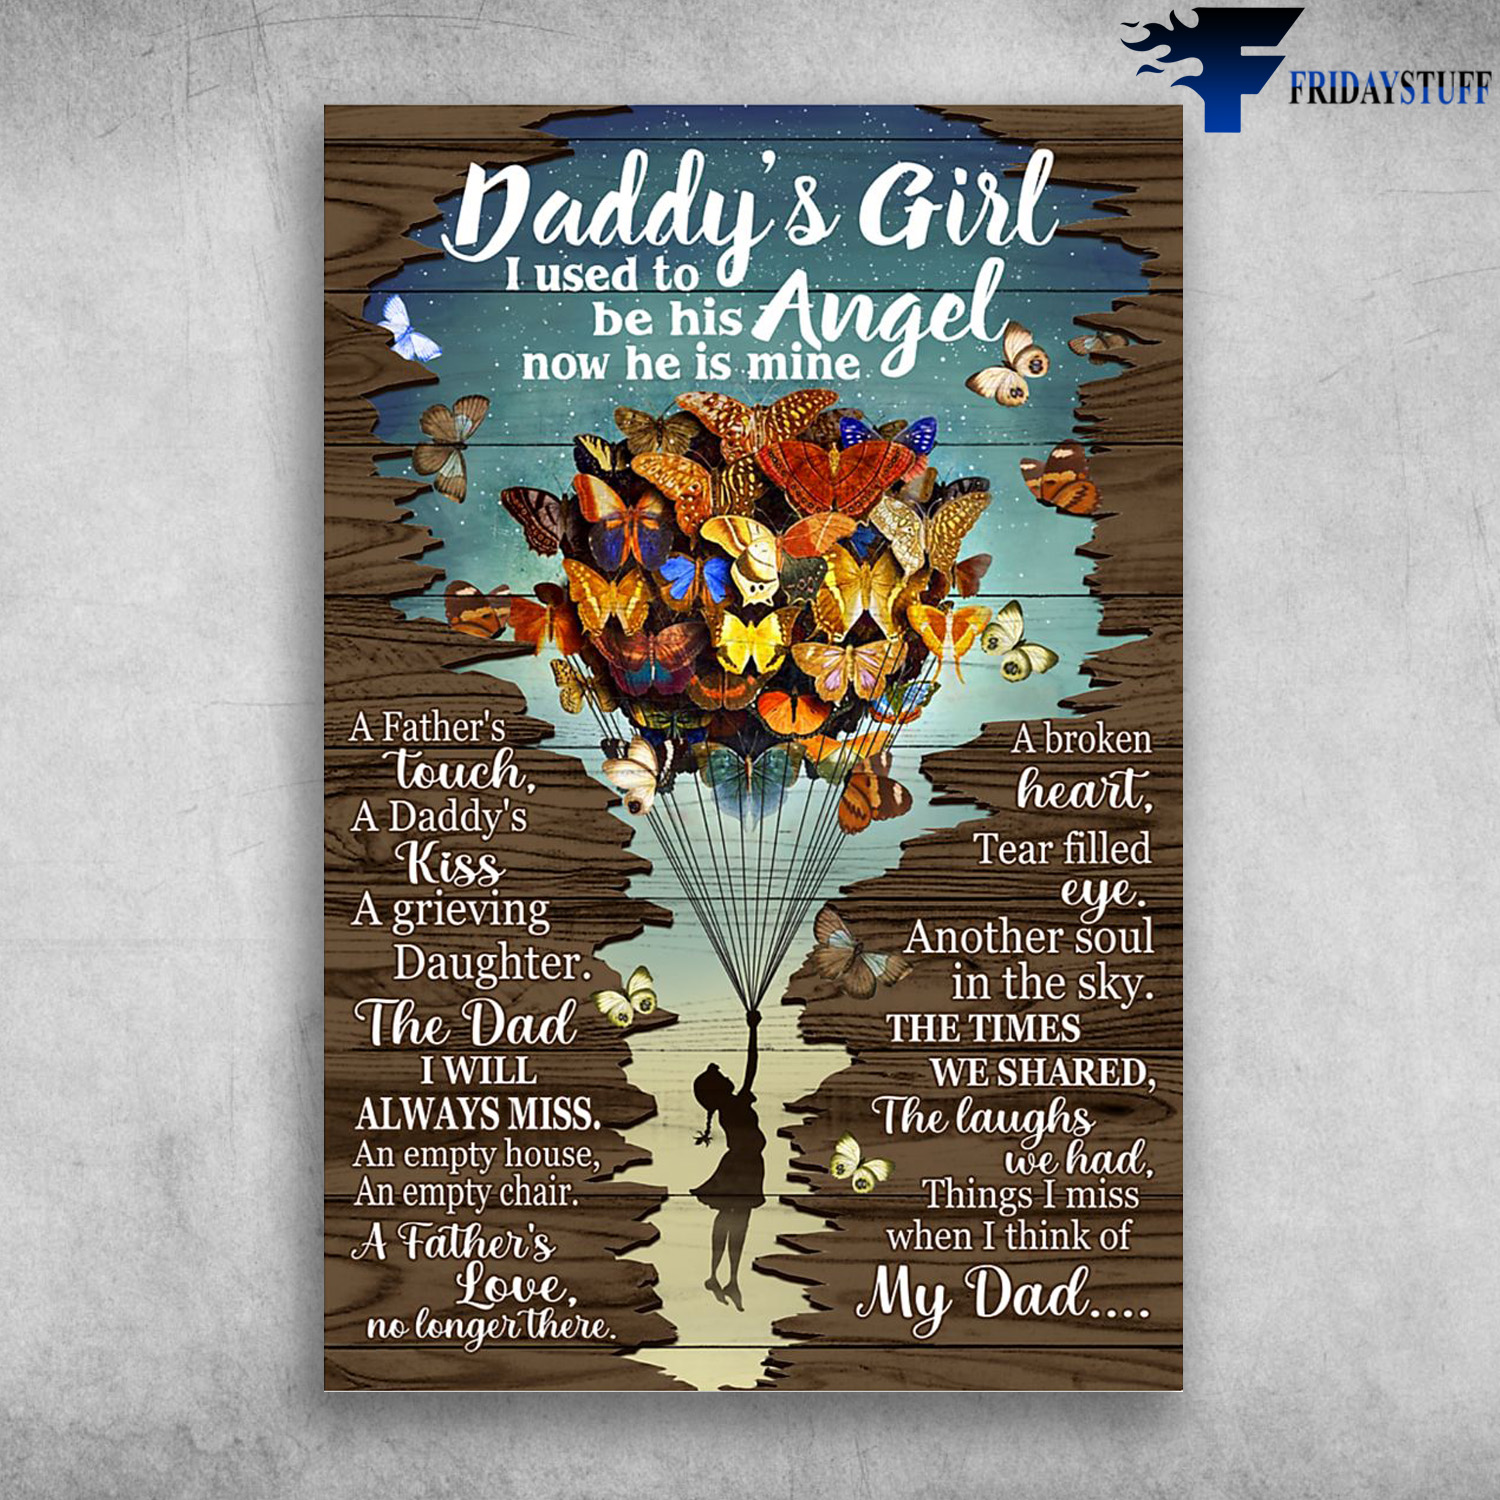 Girl Flying With Butterfly - Daddy's Girl, I Used To Be His Angel, Now He Mine, A Father's Touch, A Daddy's Kiss, A Grieving Daughter